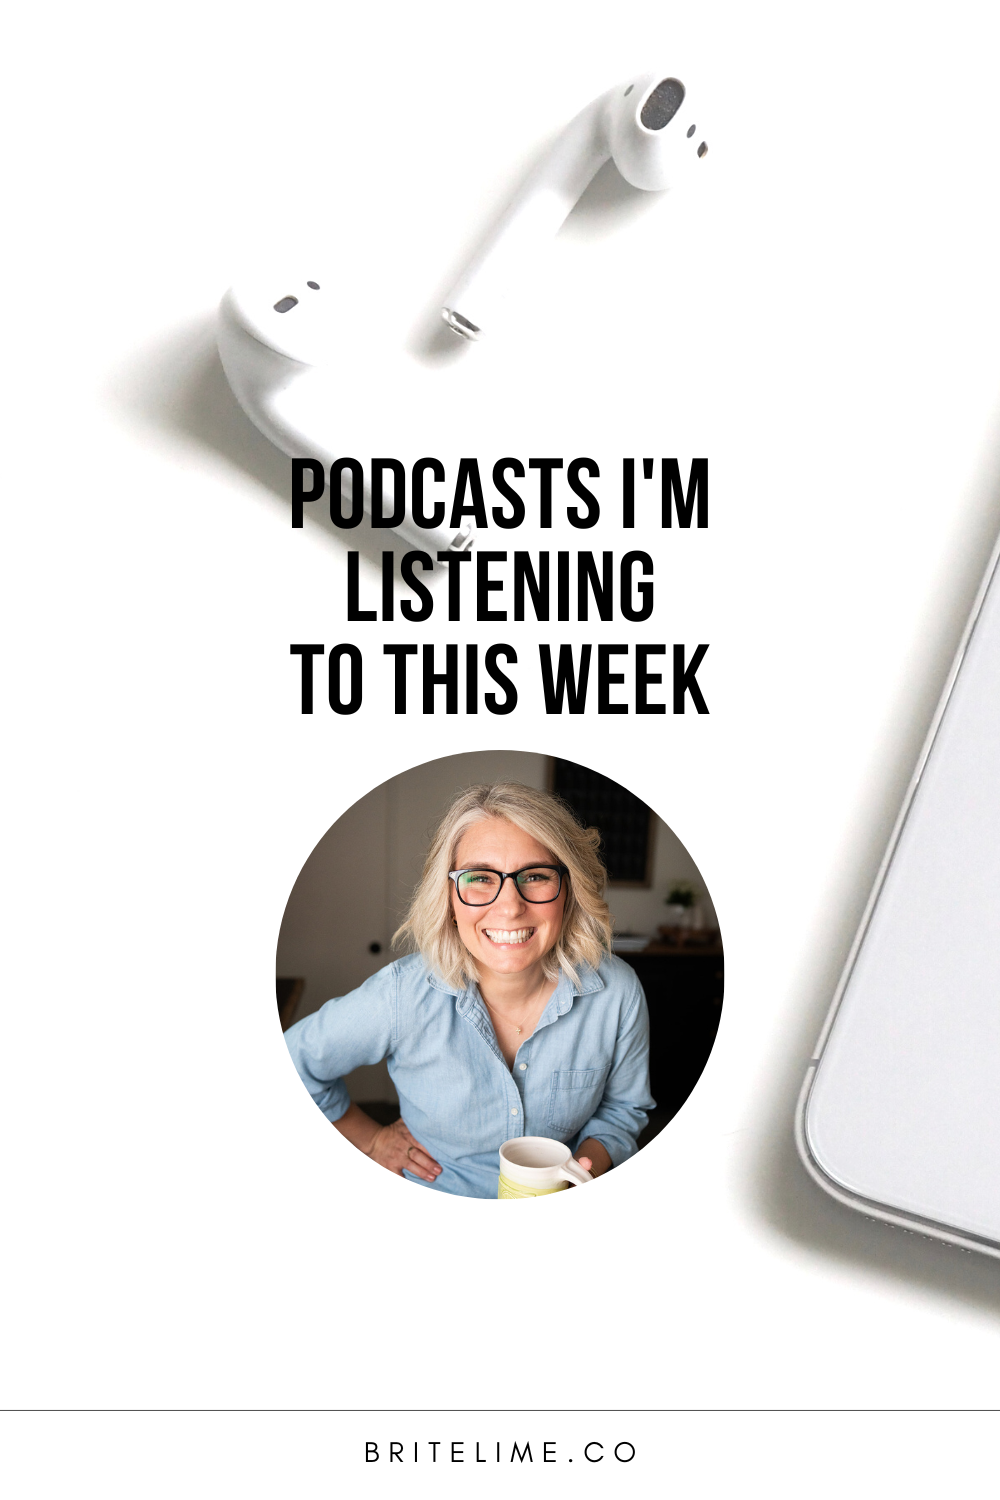 Post cover image of airpods and phone with text reading, "Podcasts I'm Listening to This Week"